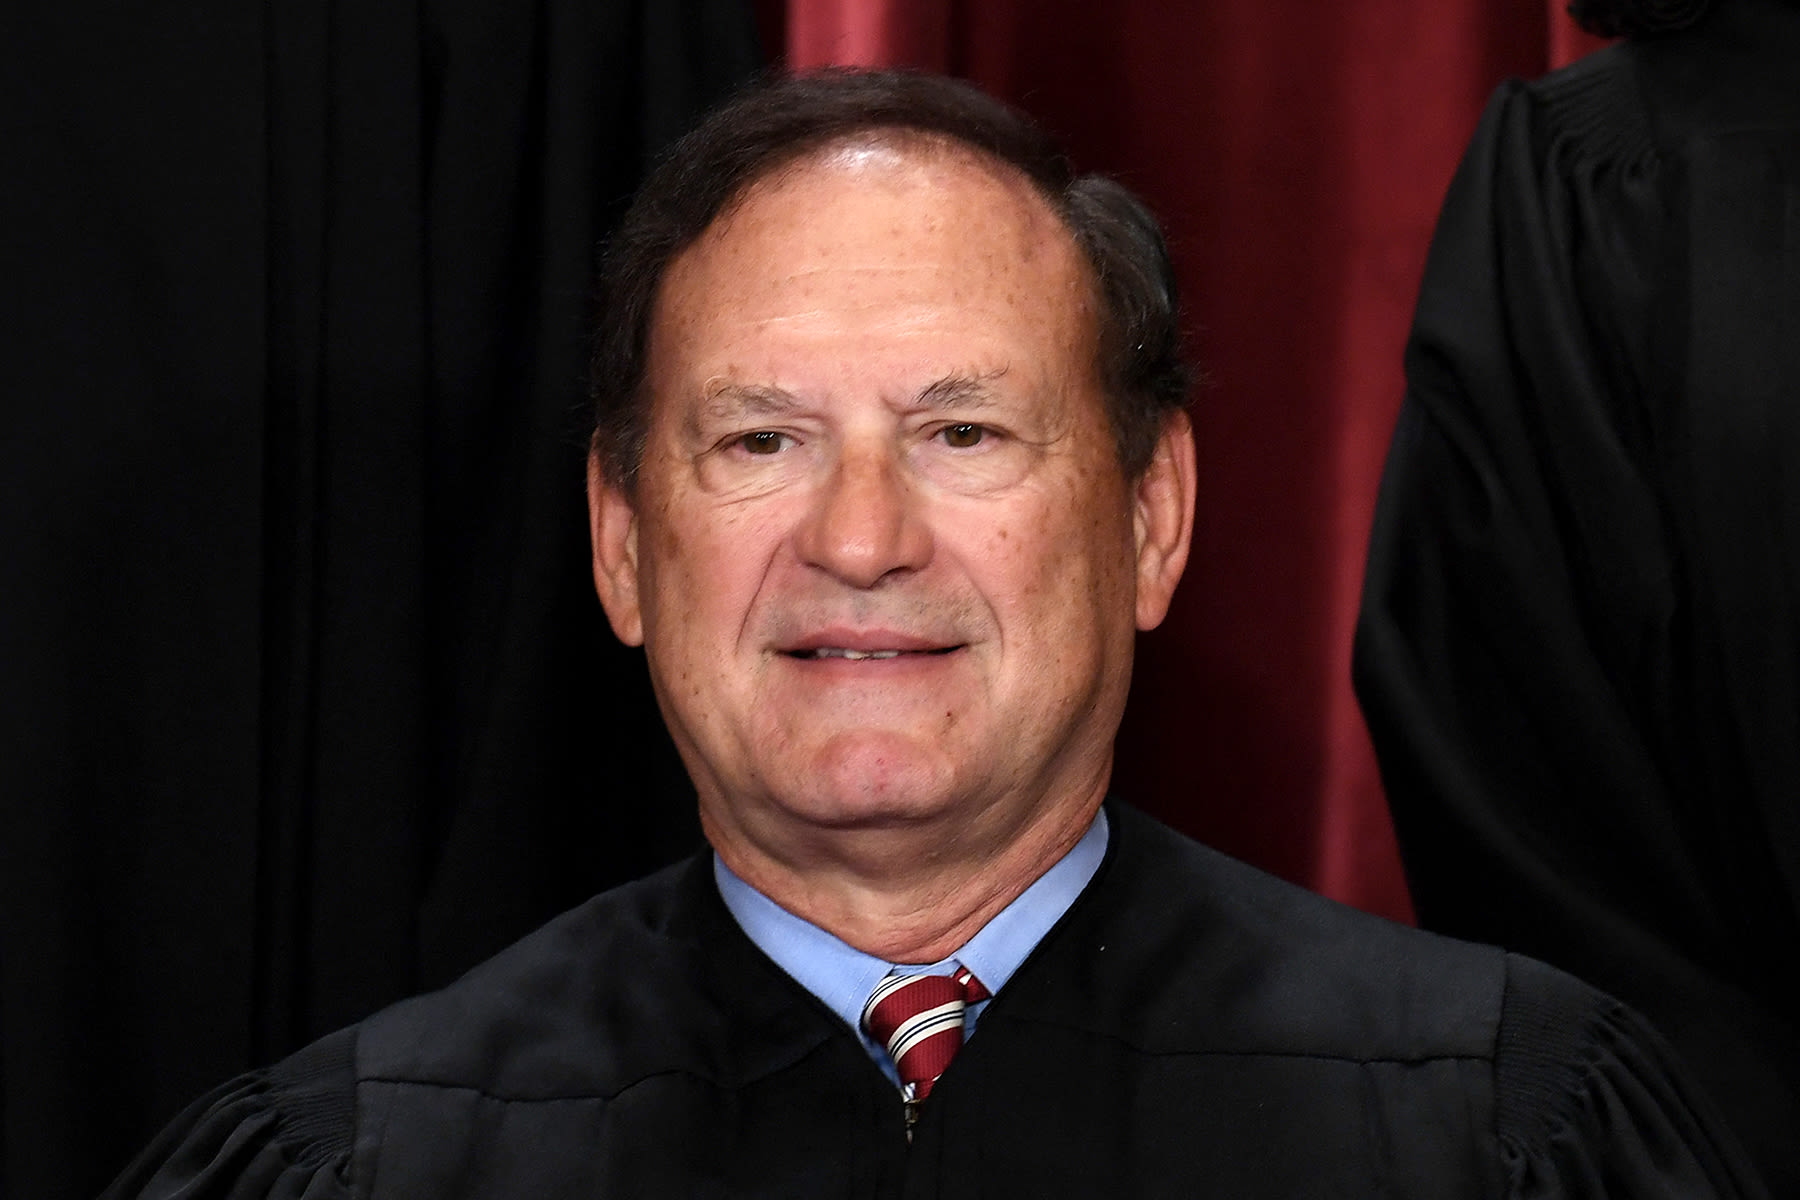 Alito Refuses to Recuse: ‘My Wife Is Fond of Flying Flags’